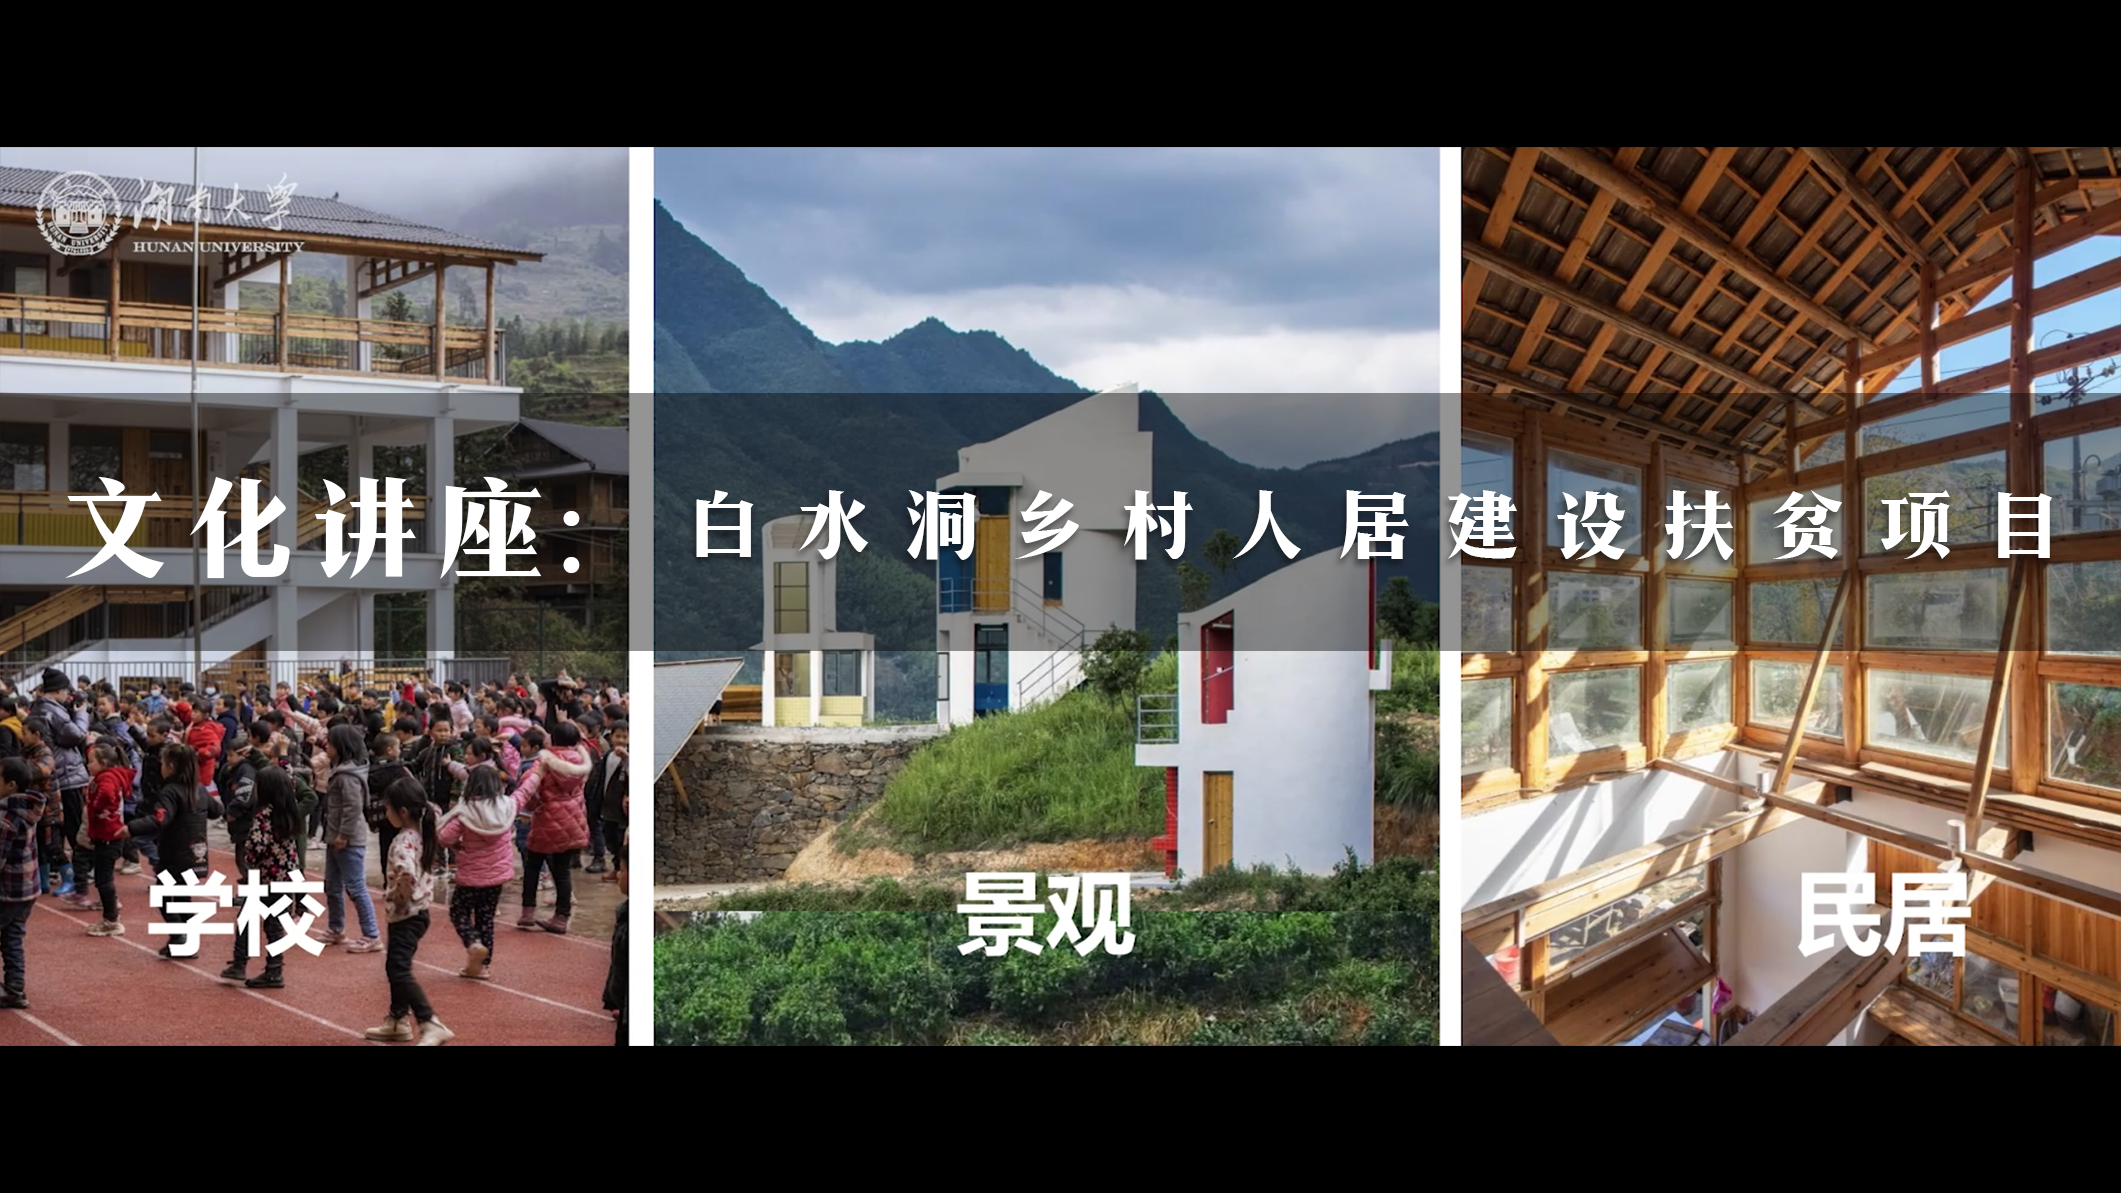 Cultural Lecture 2：The Rural Human Settlement Construction Poverty Alleviation Project of Baishuidong Village.